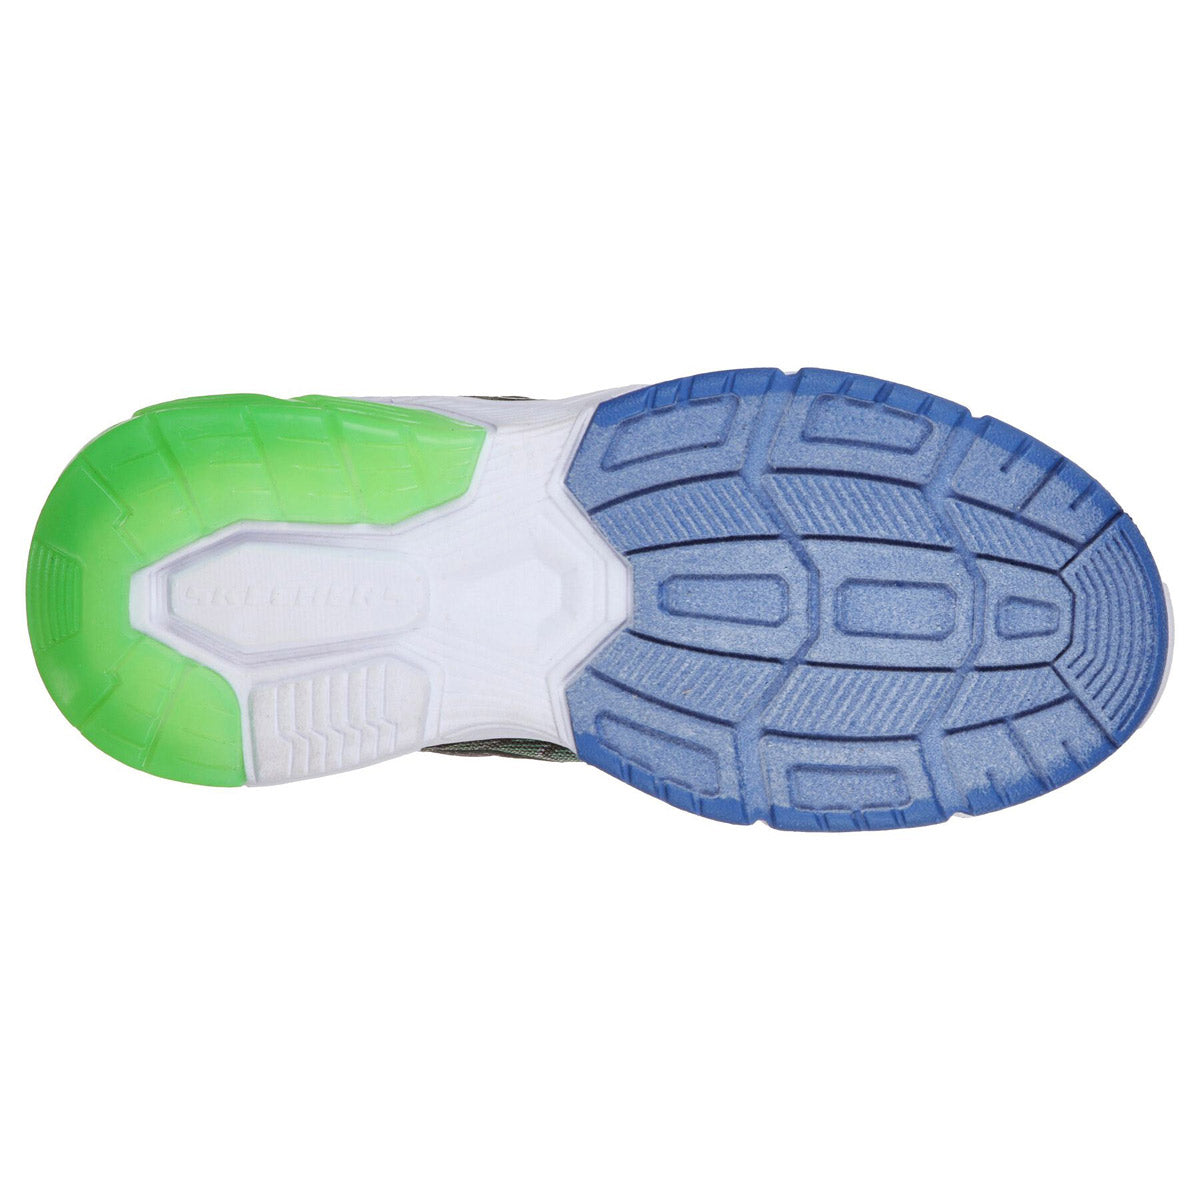 A close-up image of the sole of a Skechers ThermoFlux 2.0 MagNOID - Kids sporty training sneaker, showcasing a tri-color tread pattern with blue, green, and white sections.